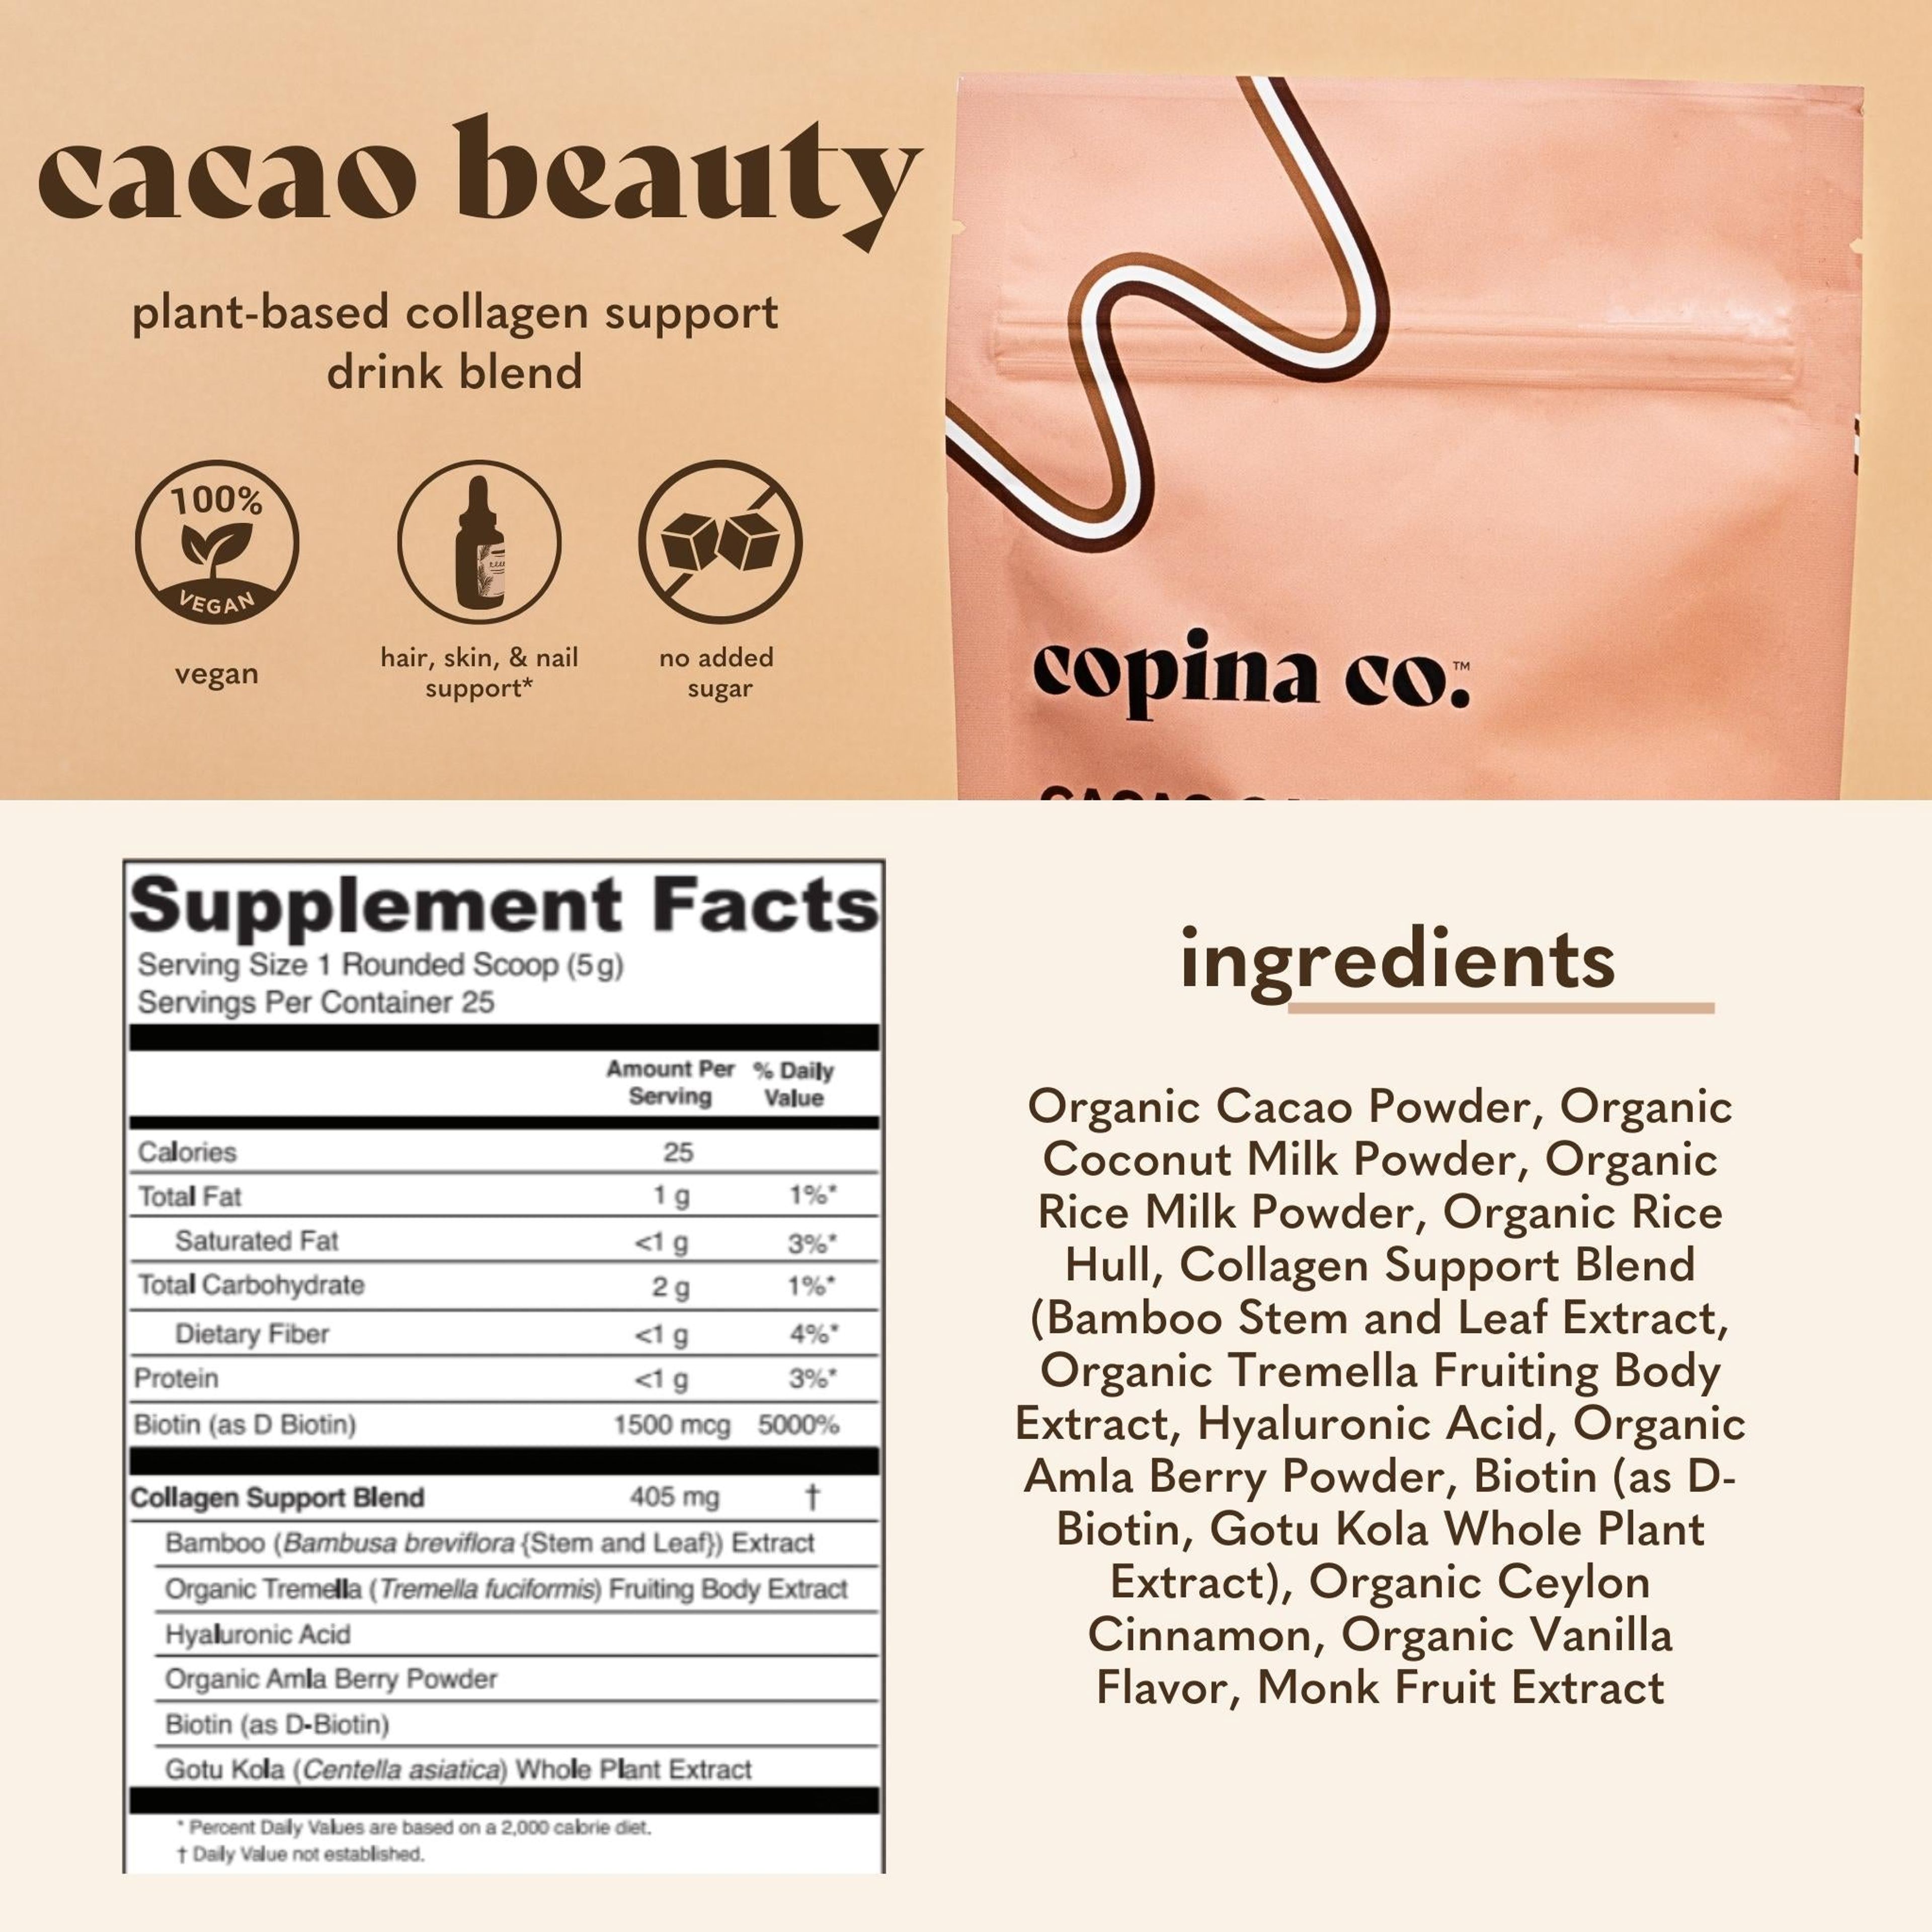 Cacao Beauty Plant-Based Collagen Support Drink Blend